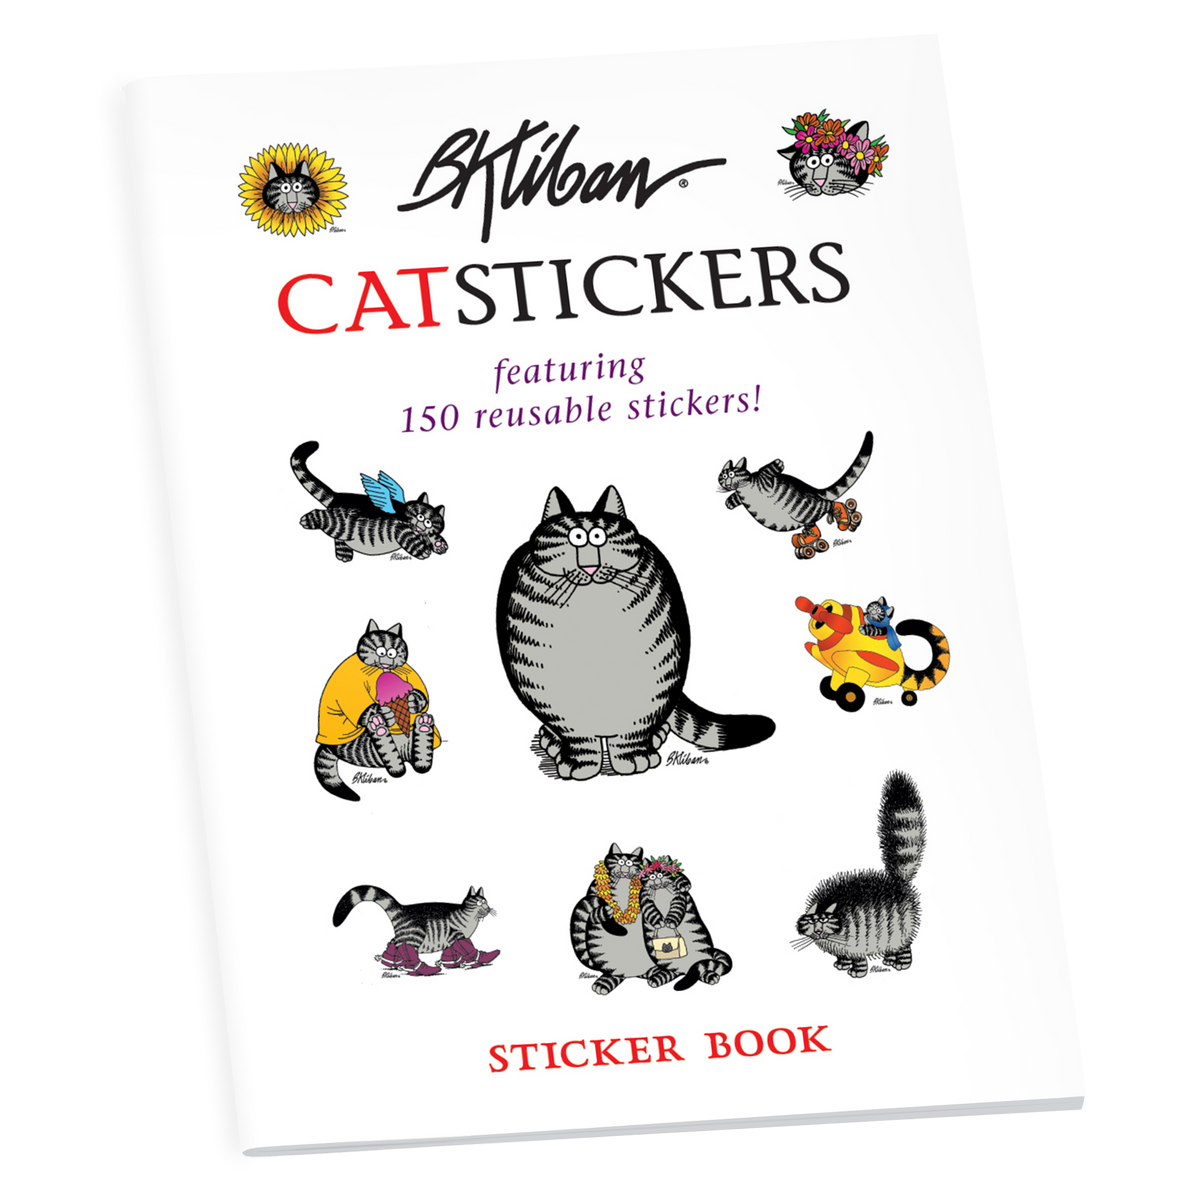 Barnes and Noble Blank sticker Book: Humorous Cat Blank Sticker Book-Beautiful  Cat Blank Sticker Book for Kids Stickers Collection book-Kids stickers  collection book-Blank sticker journal For Boys , Sticker book, Blank sticker